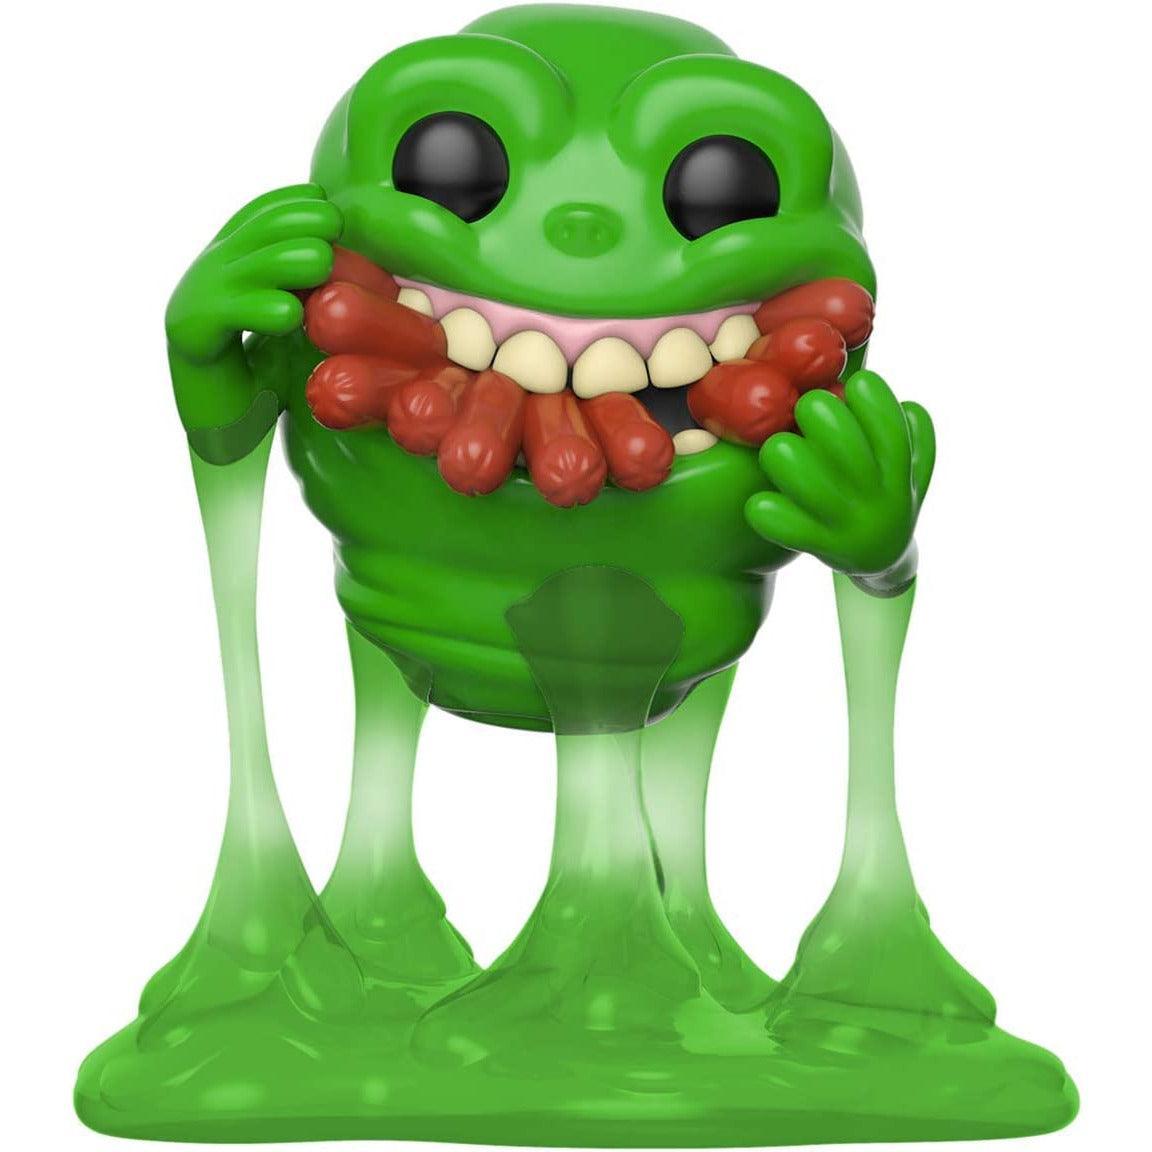 Funko Pop! Movies Ghostbusters - Slimer With Hot Dogs - BumbleToys - 18+, 4+ Years, 5-7 Years, Action Figures, Boys, Dolls, Funko, Pre-Order